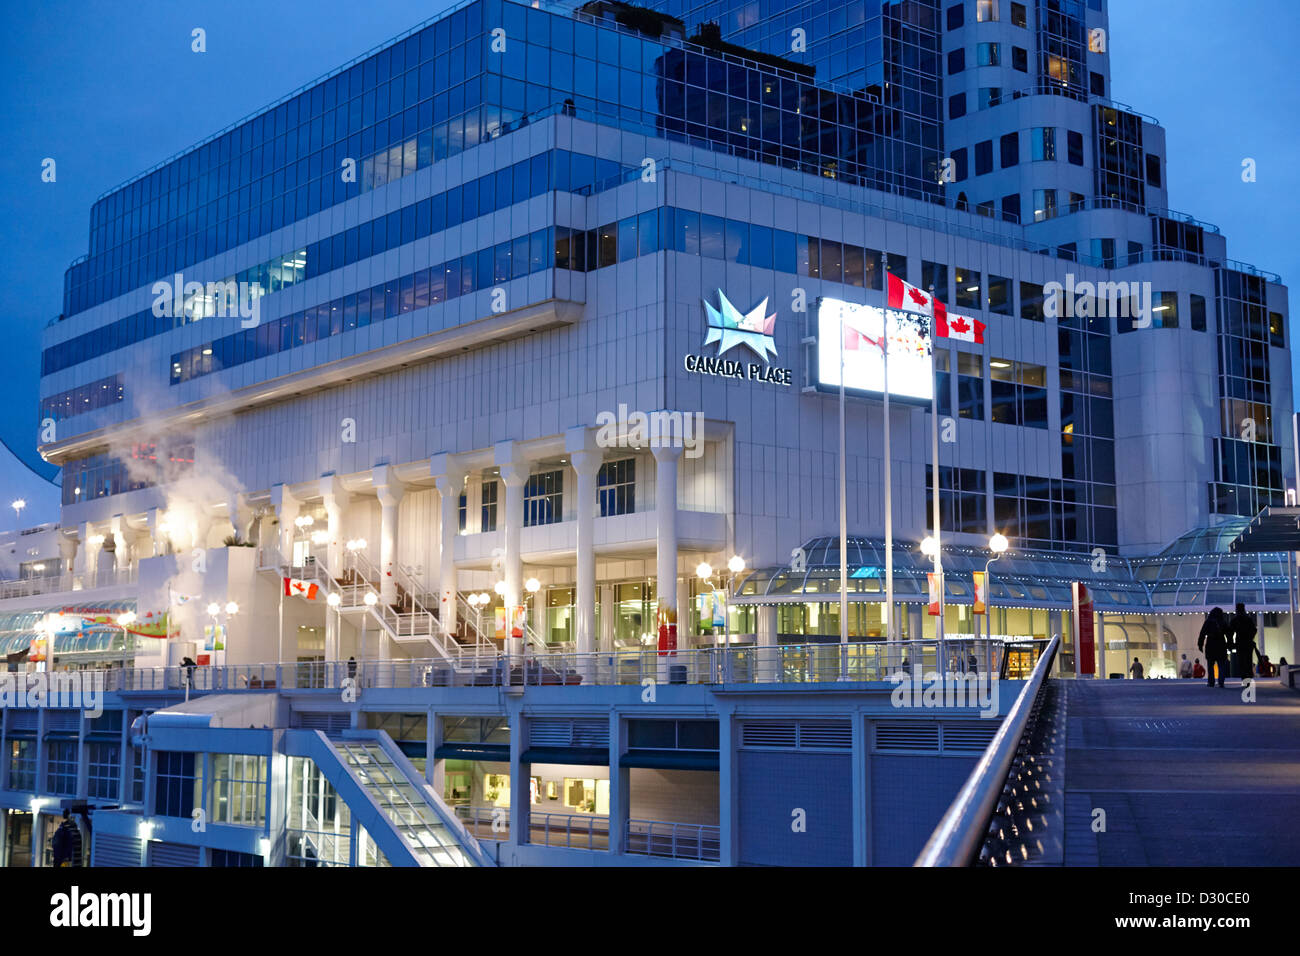 late evening at canada place building Vancouver BC Canada Stock Photo